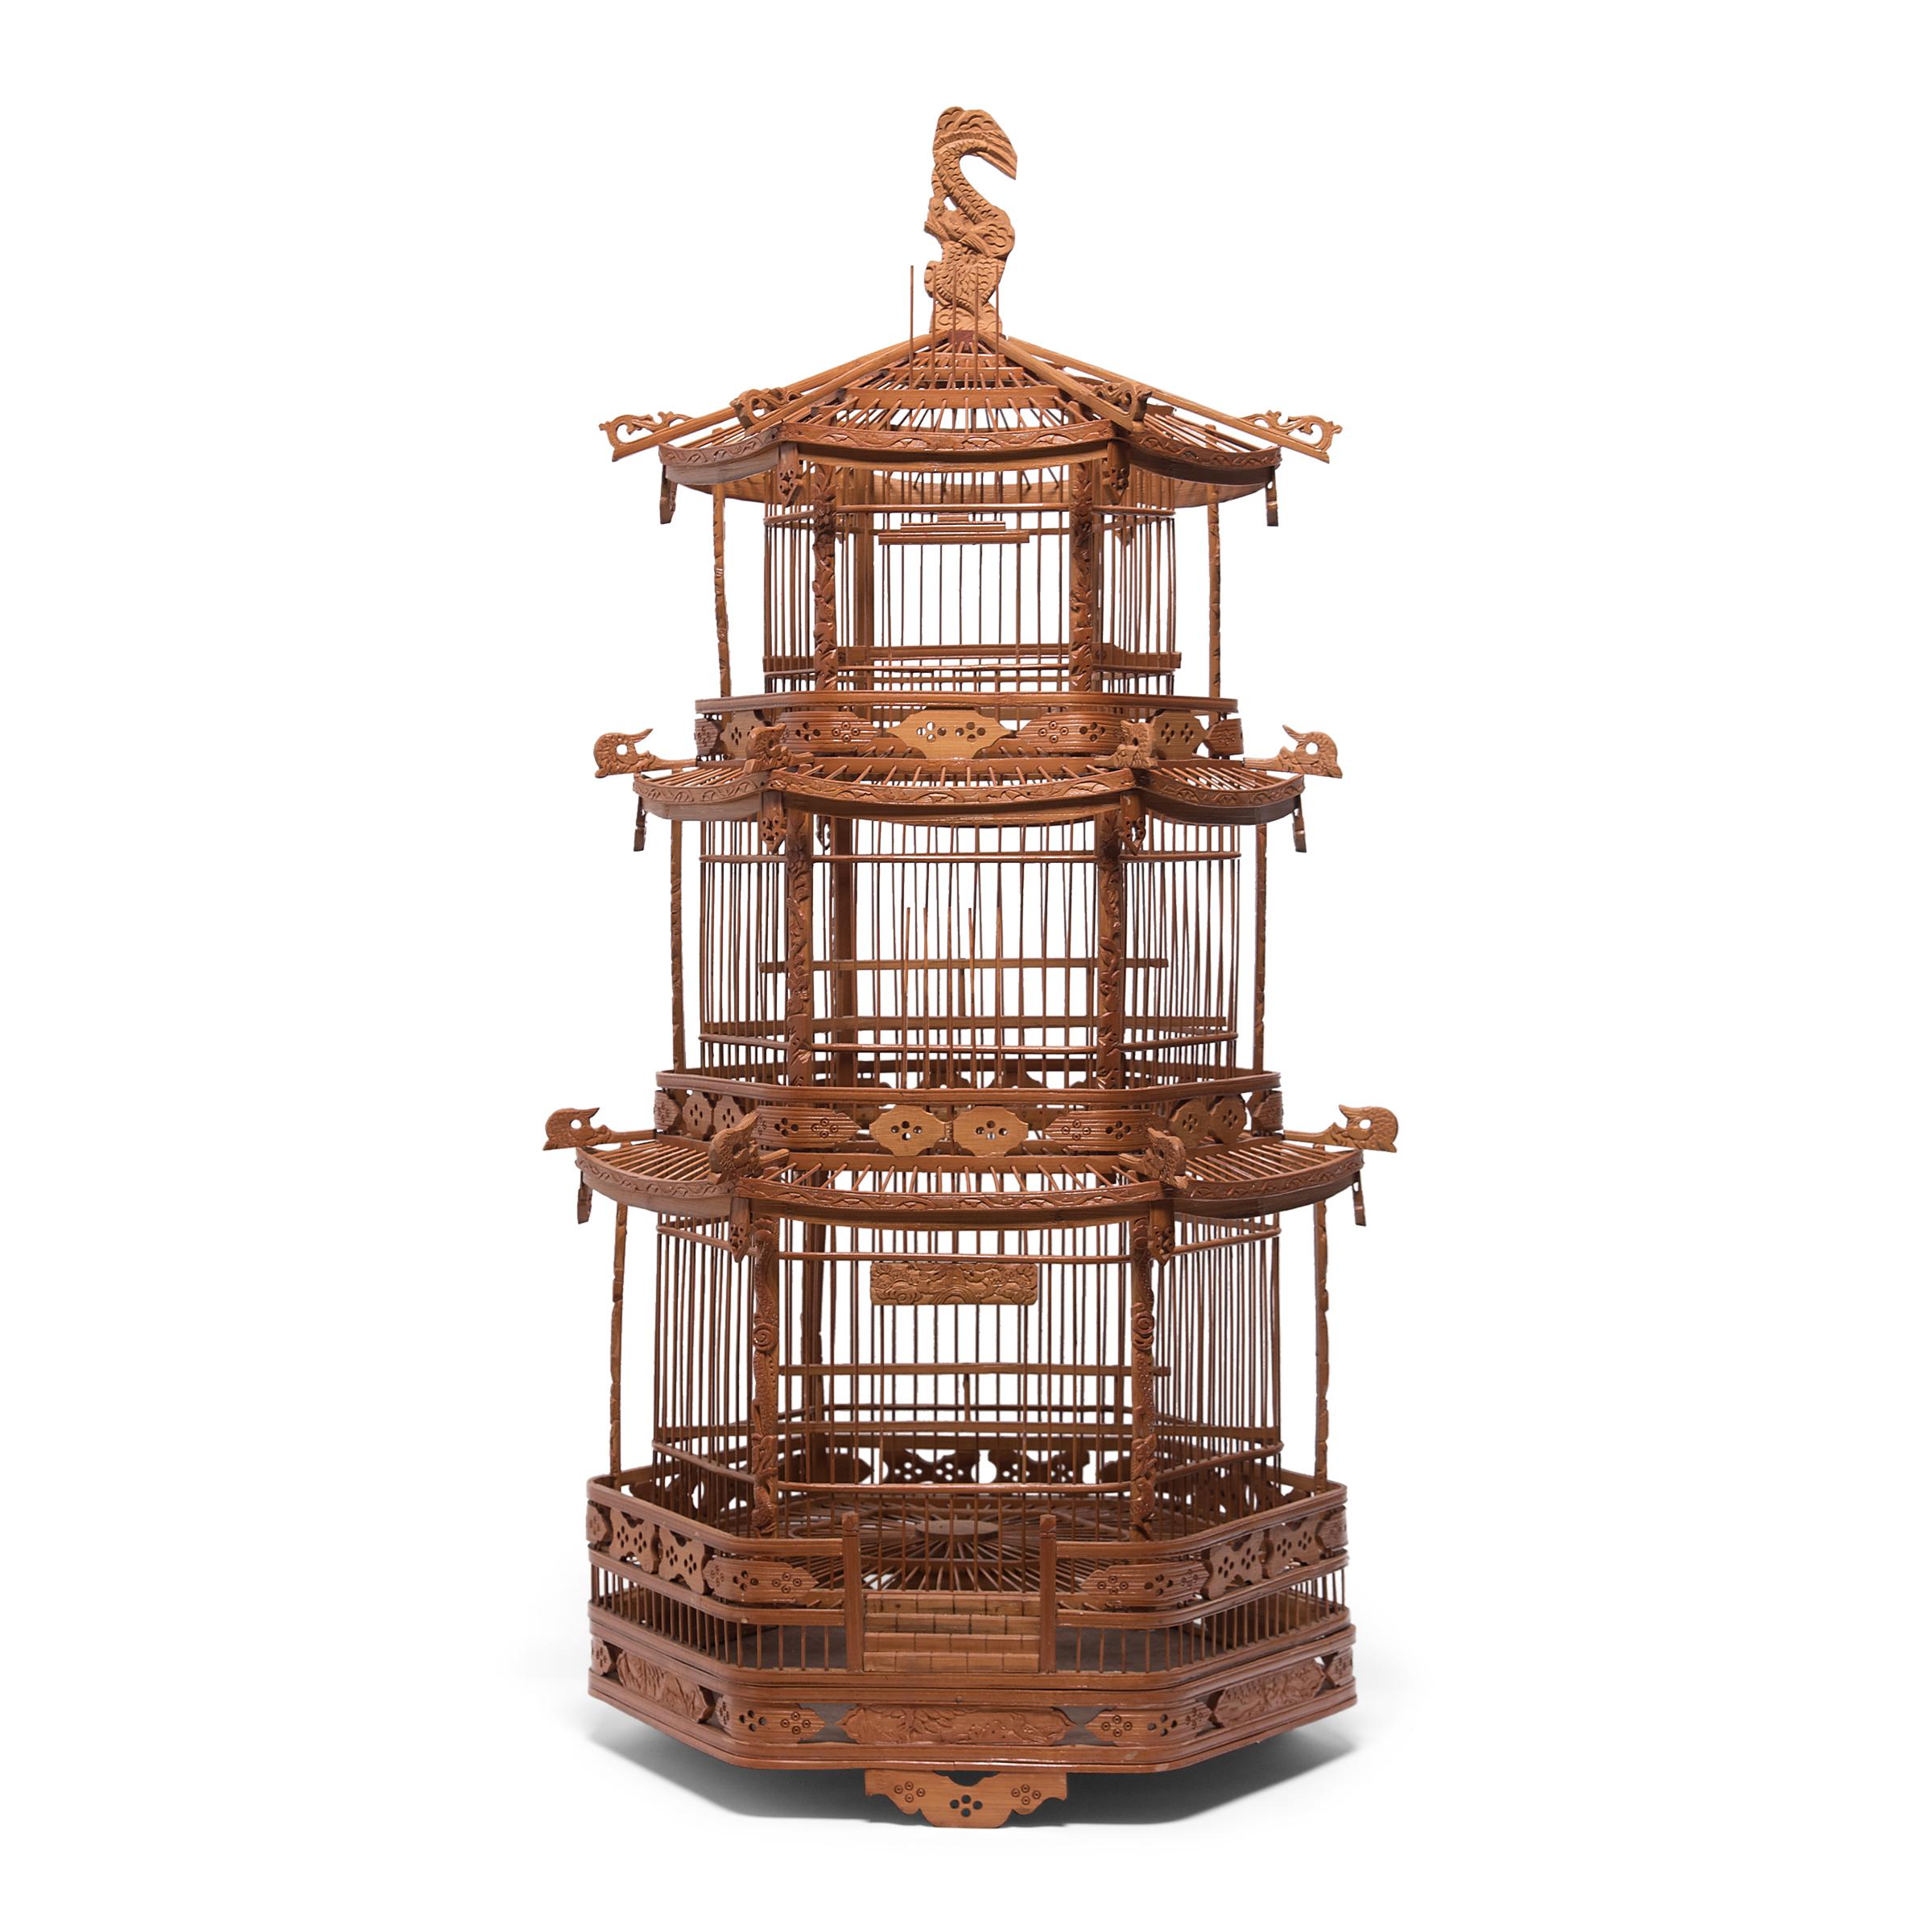 A triumphant display of grandeur and fine craftsmanship, this monumental birdcage was once home to the pet bird of a Qing-dynasty aristocrat. Dated to the late 19th century, the cage was carefully assembled into the shape of a towering three-tiered